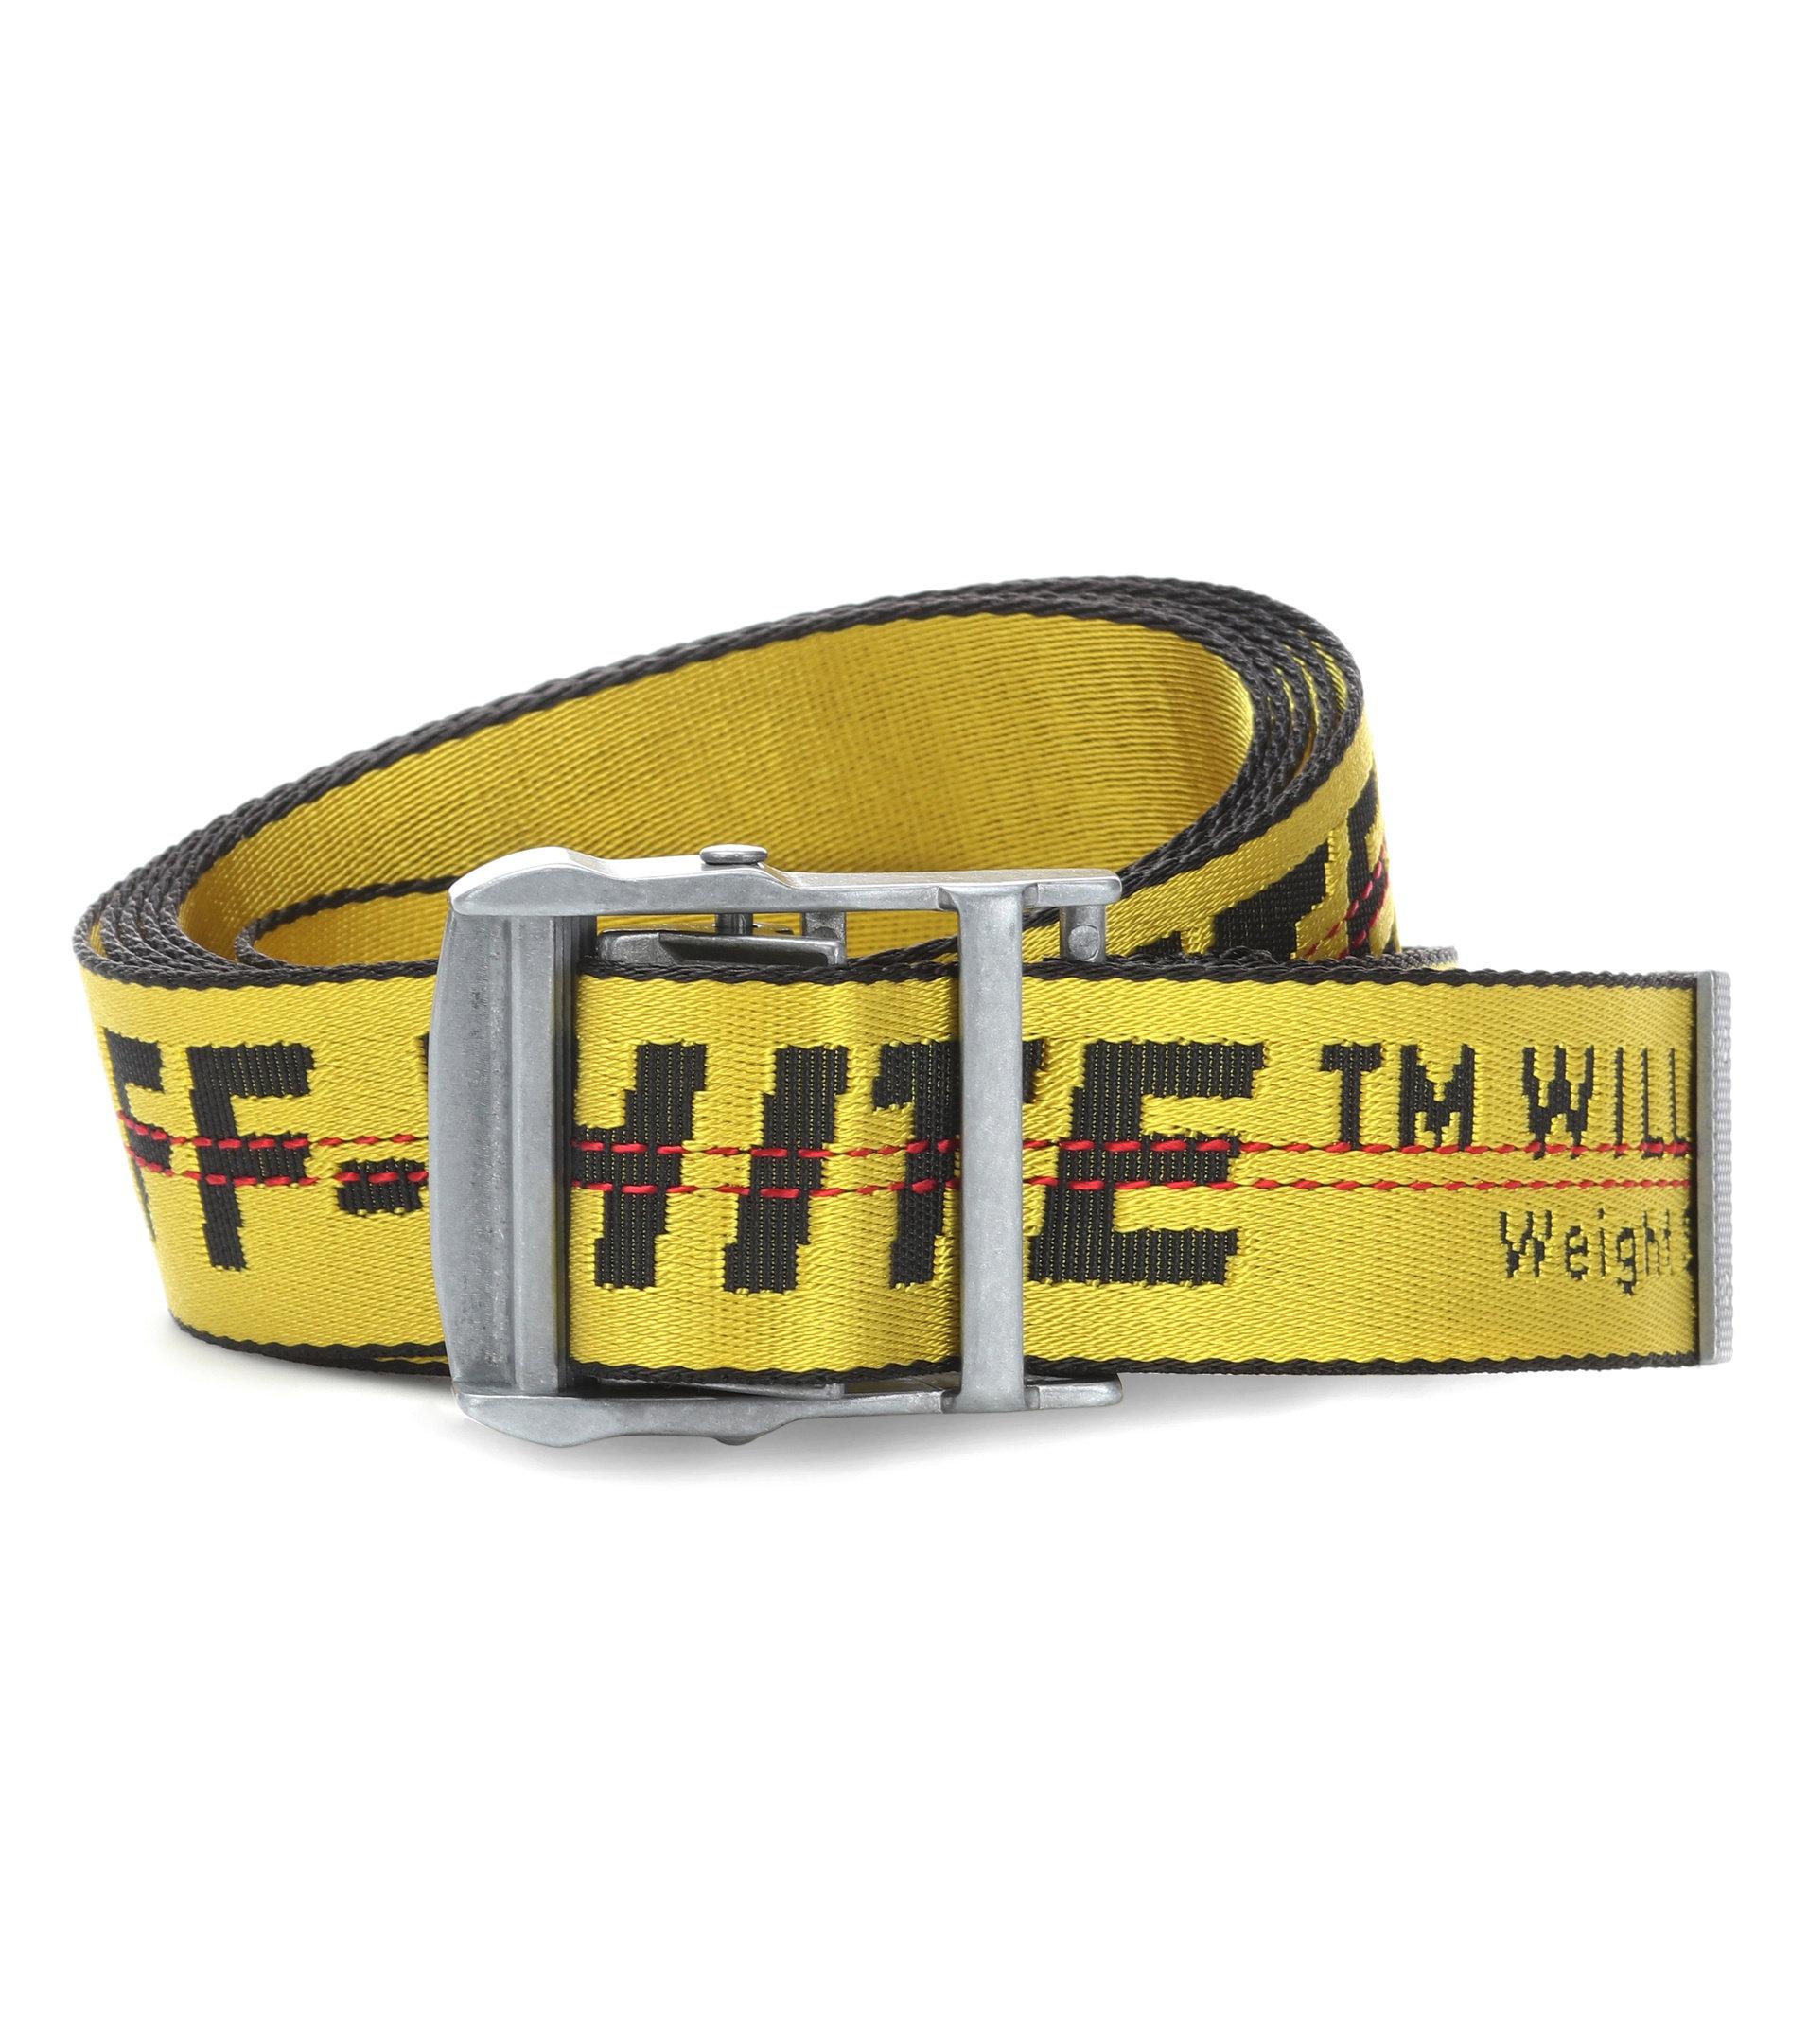 Off-White c/o Virgil Abloh Industrial Belt in Yellow - Lyst